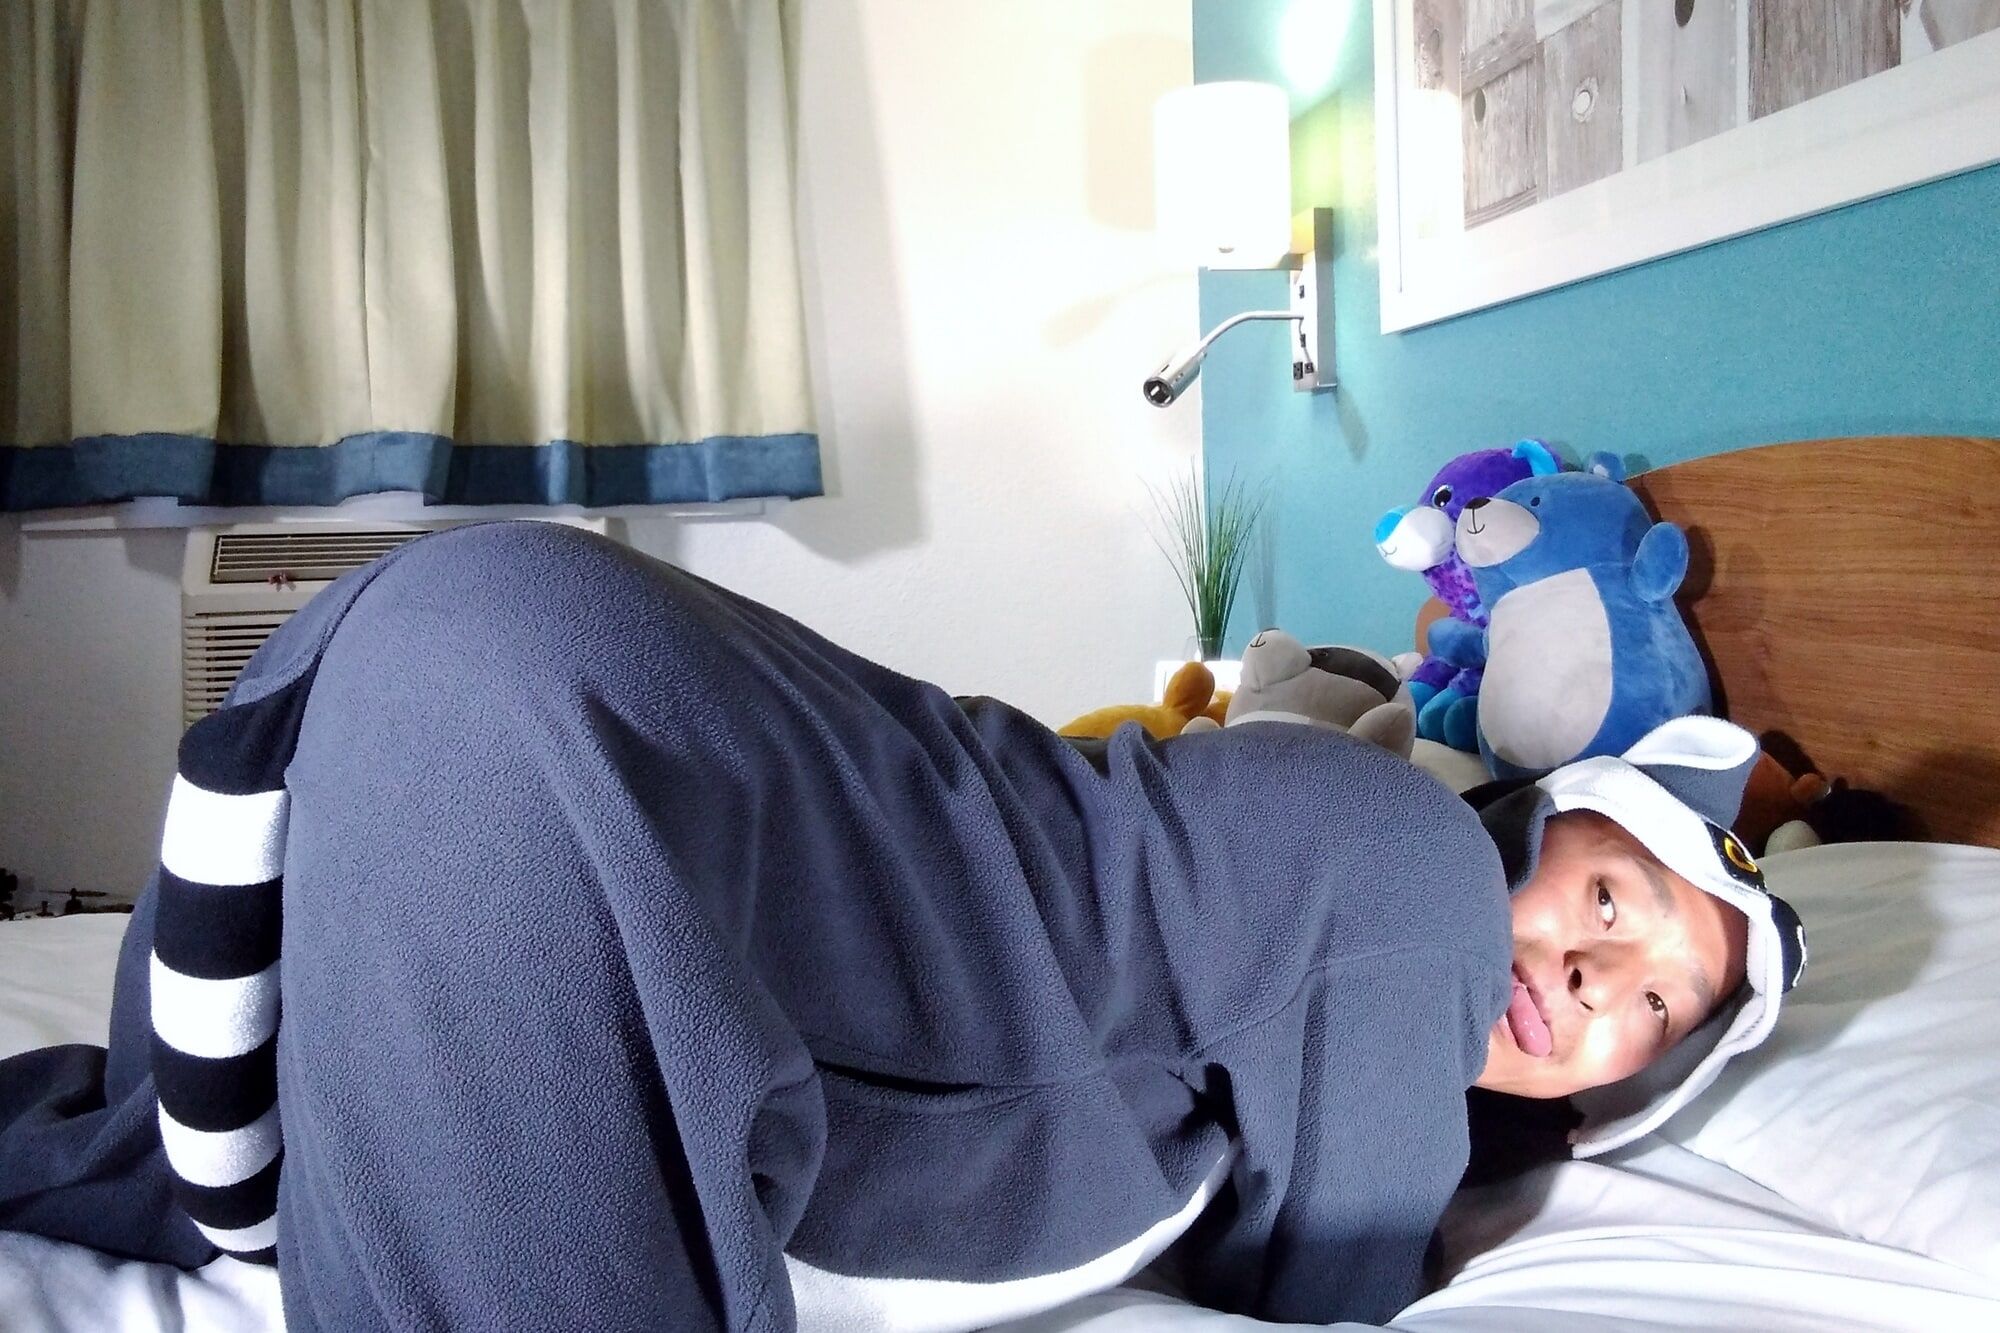 Hot asian boy wearing furry onesies and shiny undies #20